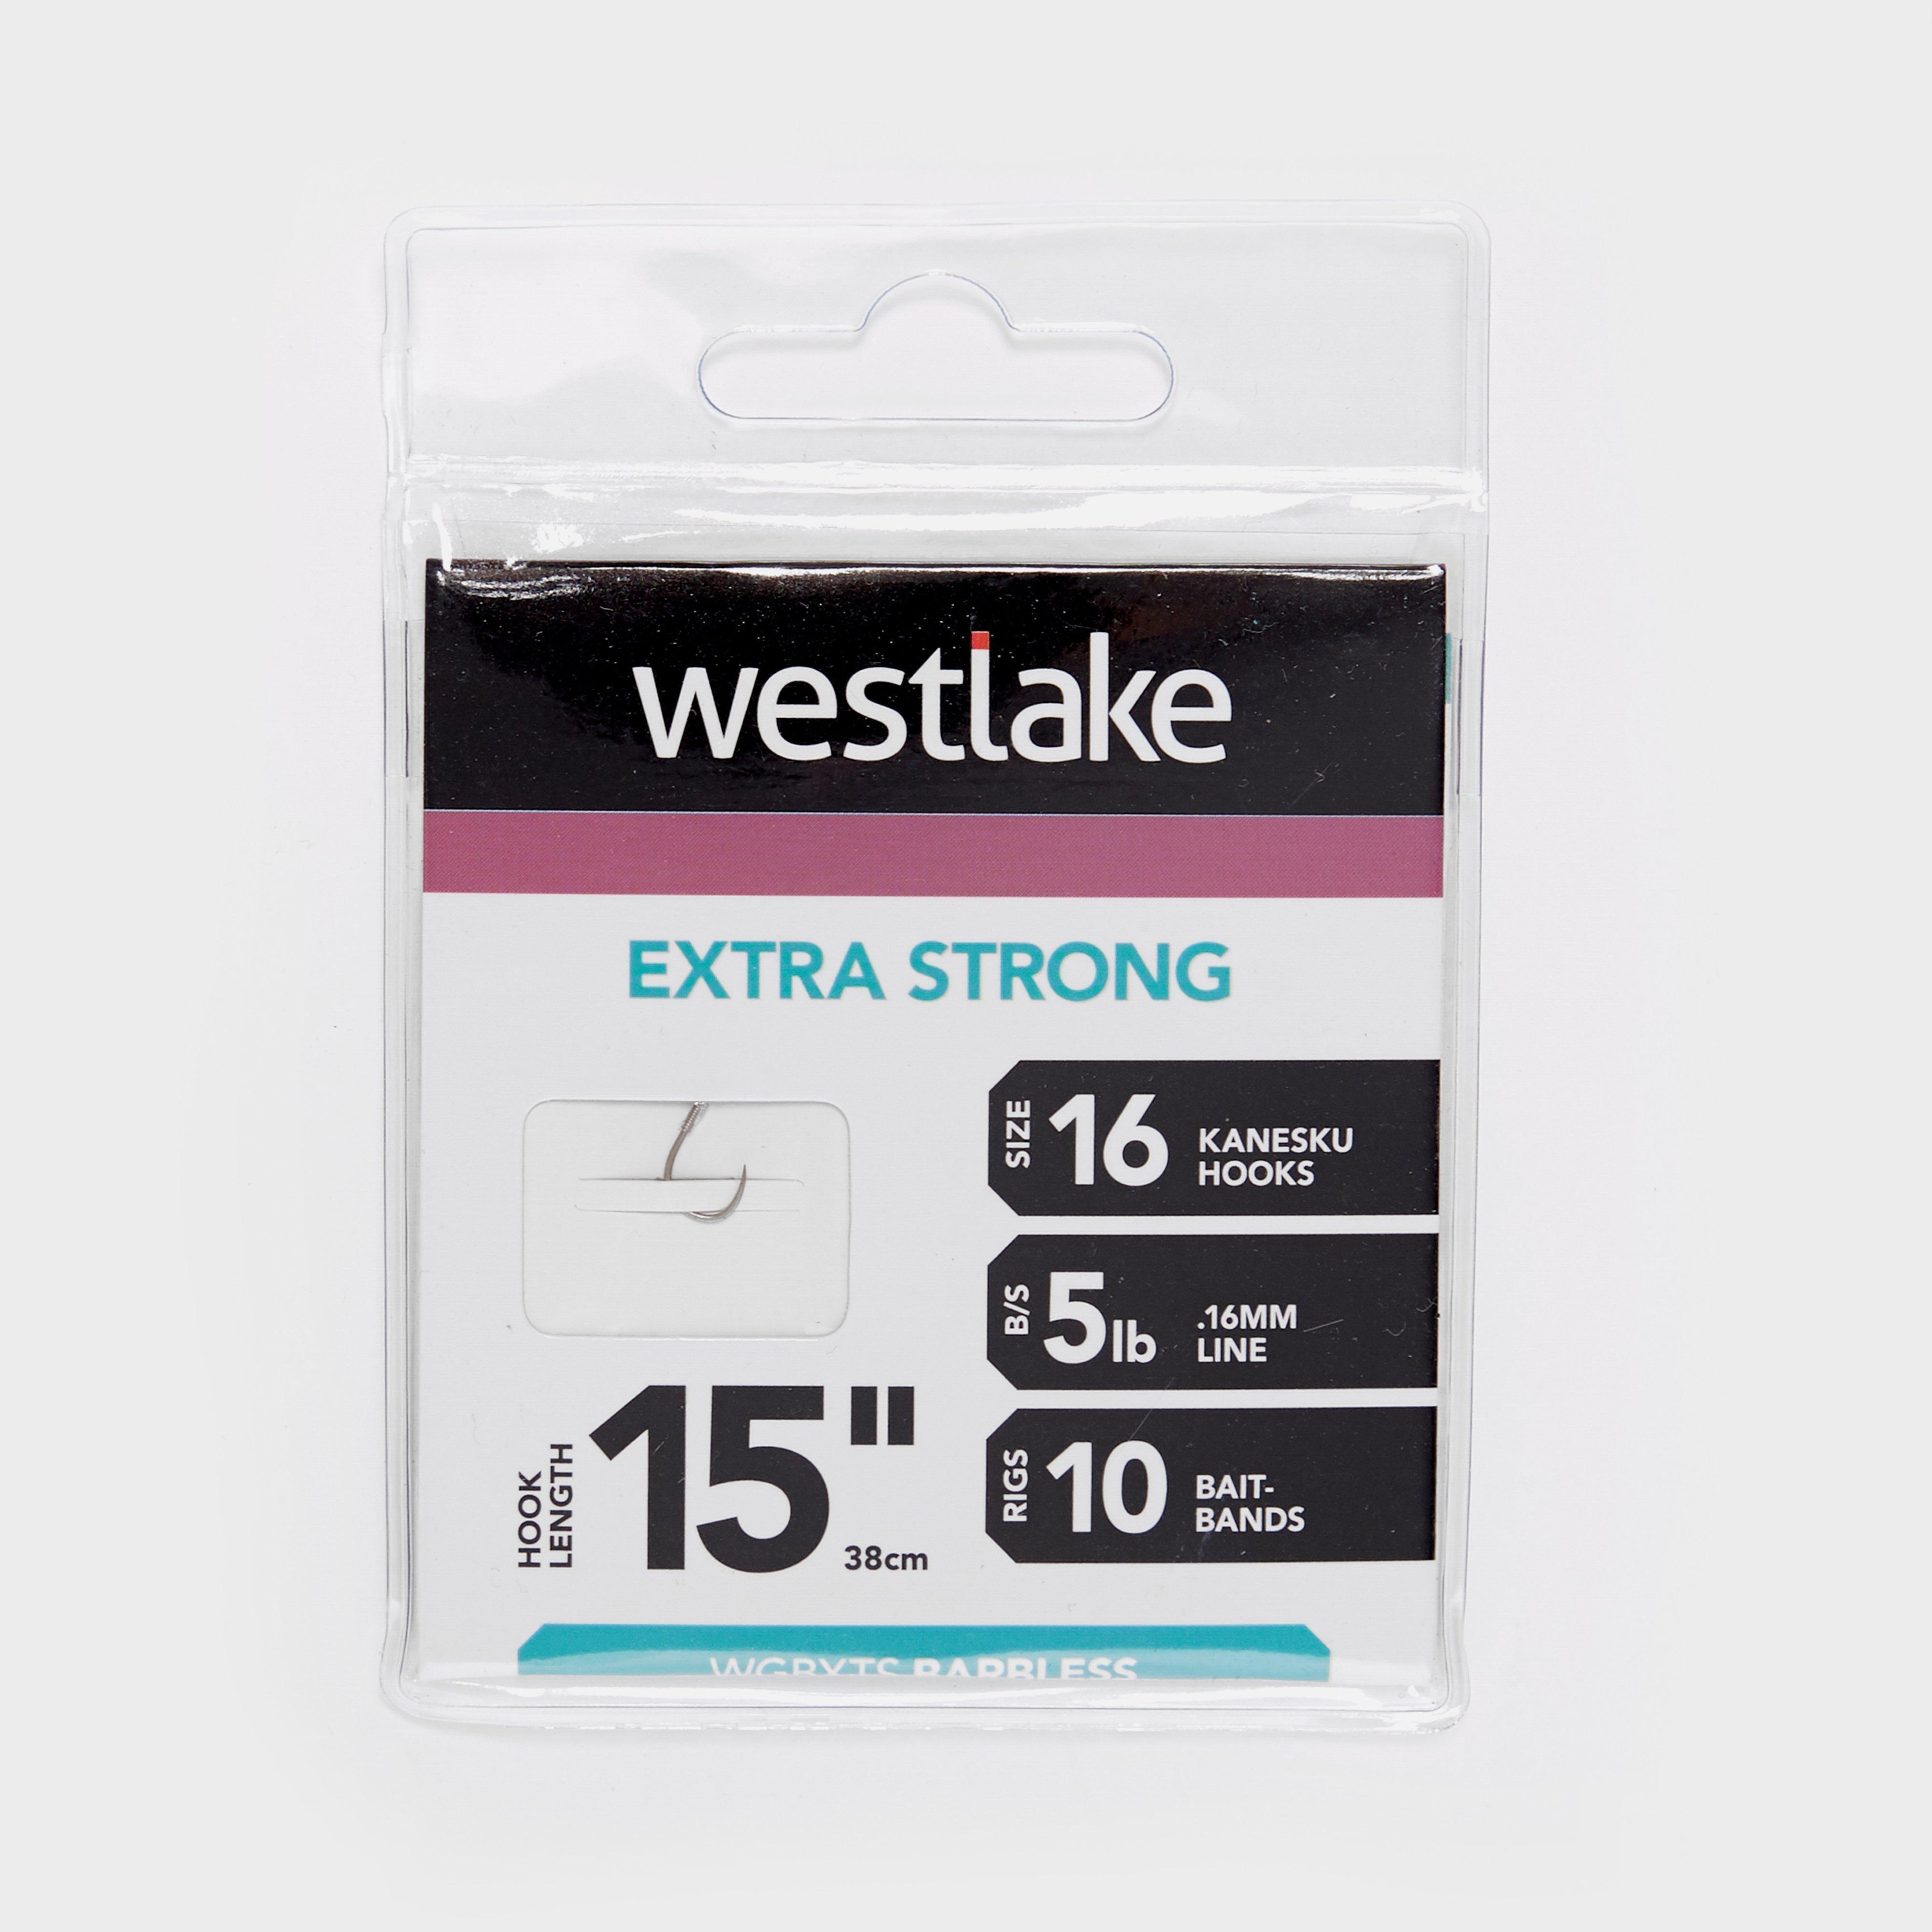 Westlake Waggler Feeder Extra Strong (size 16) - Silver/plain  Silver/plain